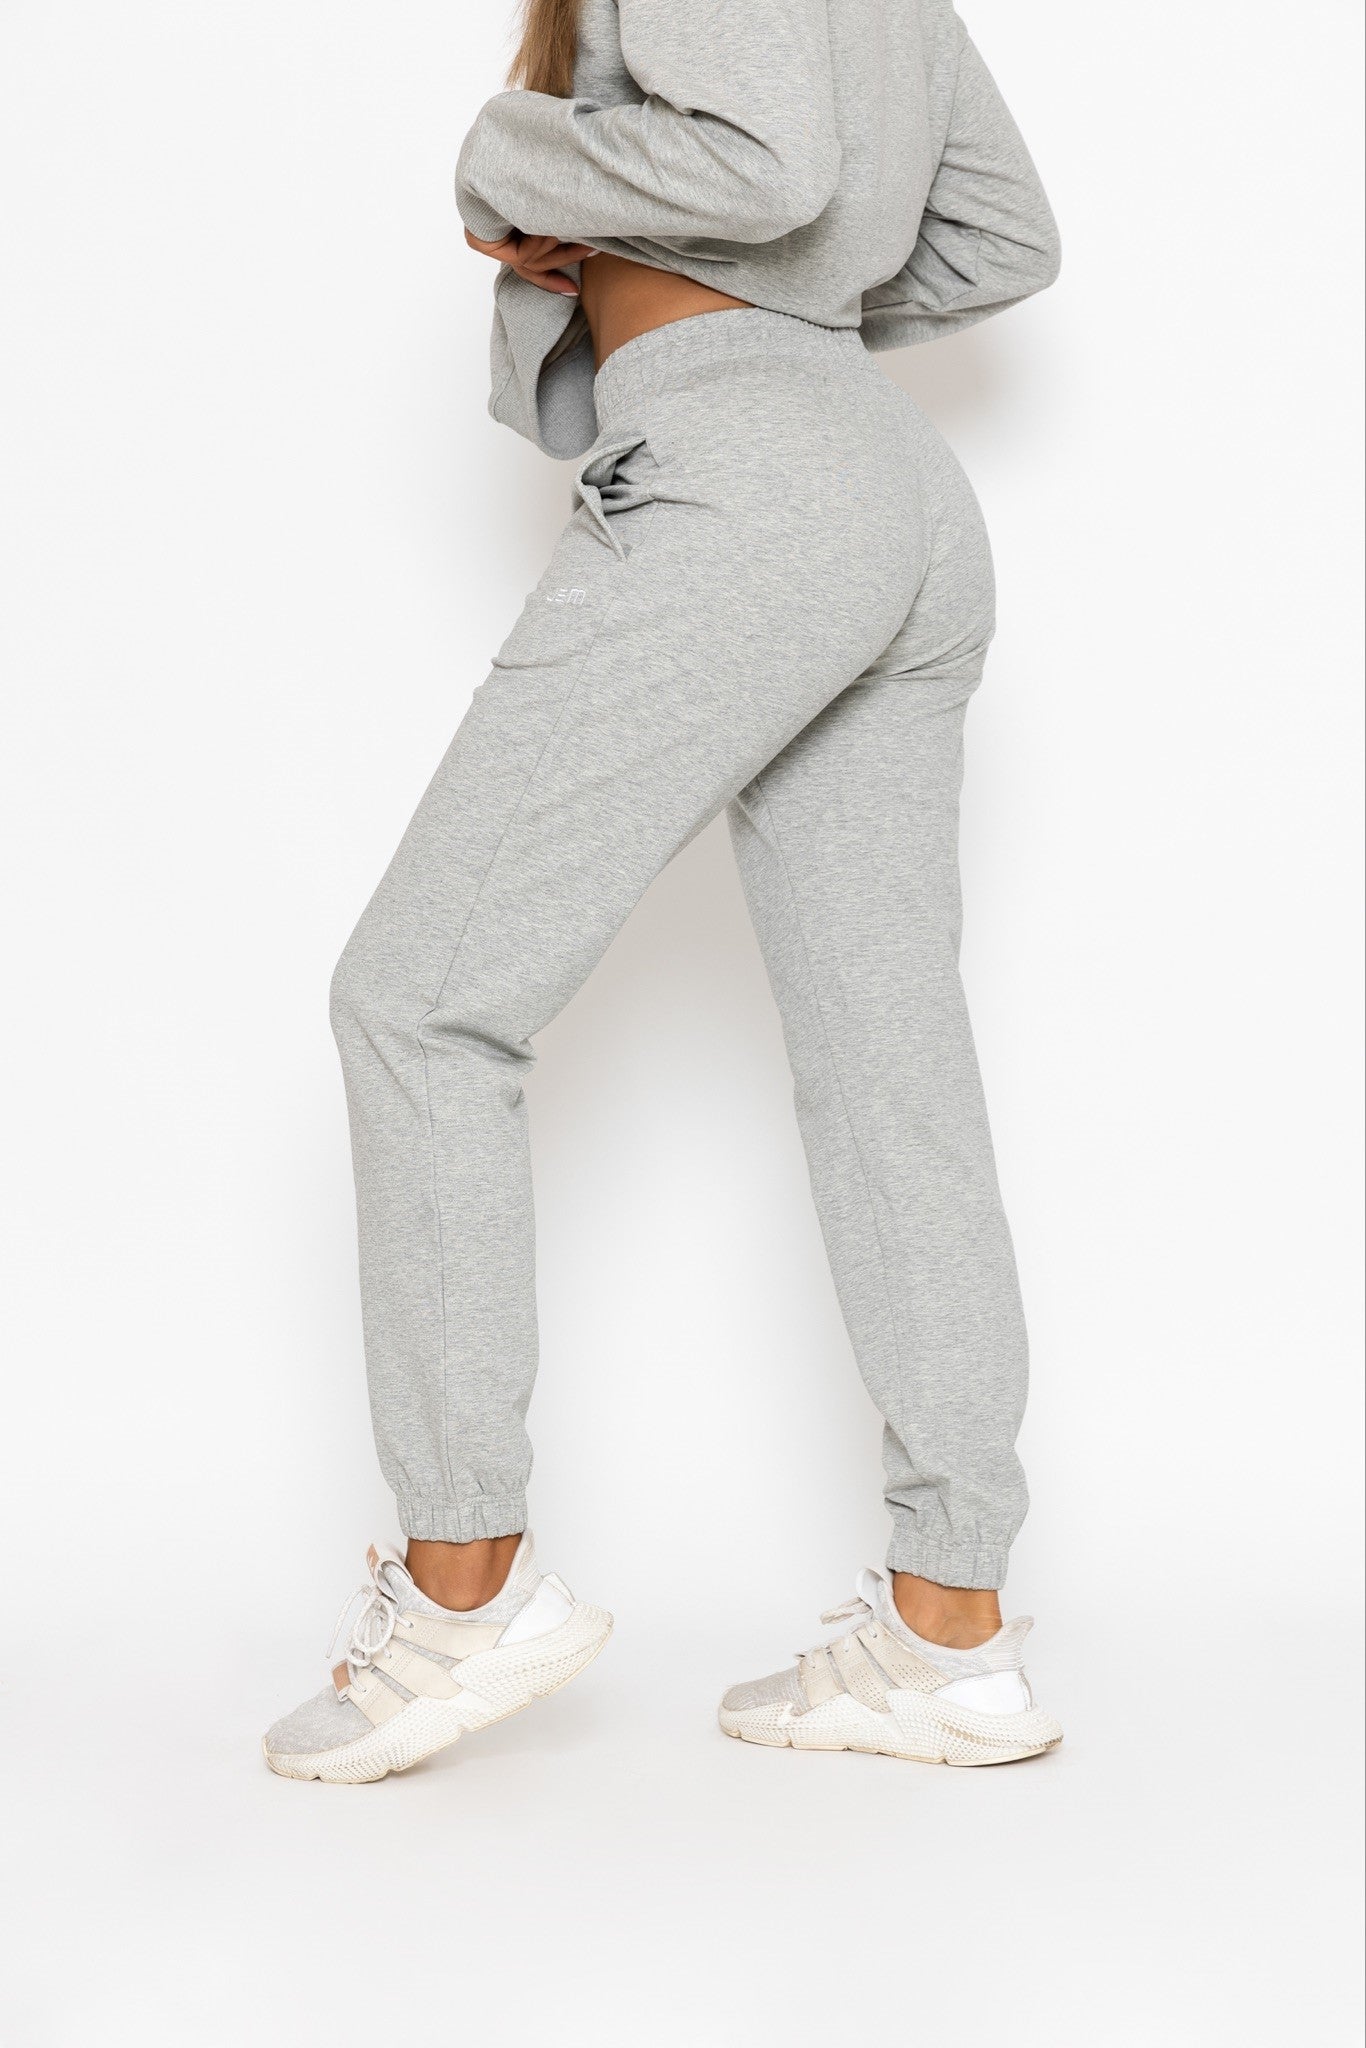 JEM Sporting Track Pant Essential Trackpants - Heather Grey